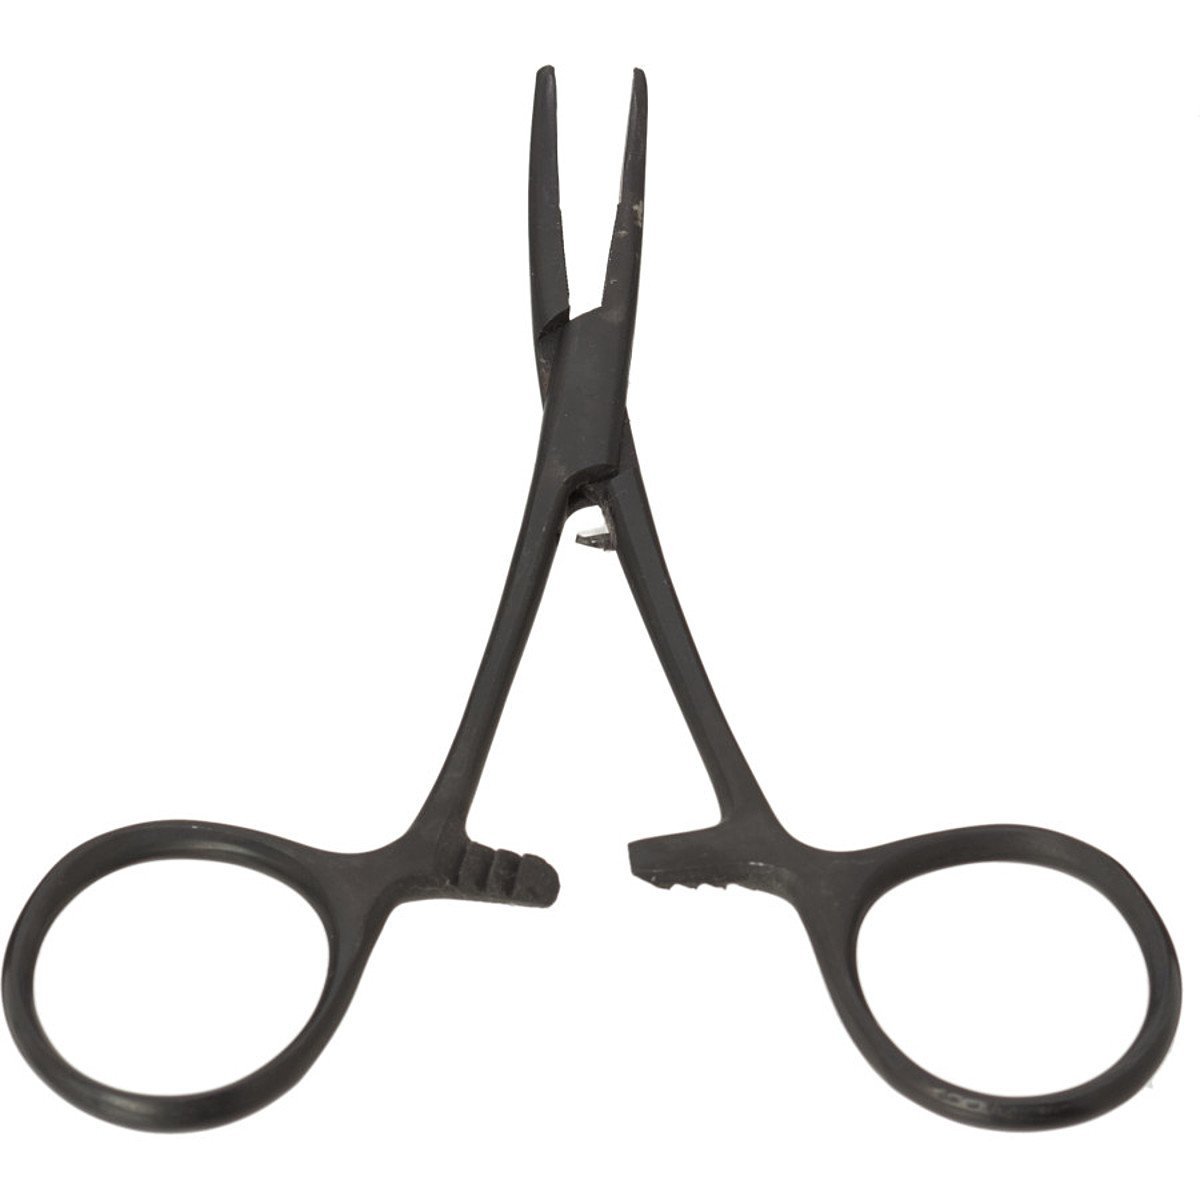 Angler's Accessories 5.5 Curved Forceps 